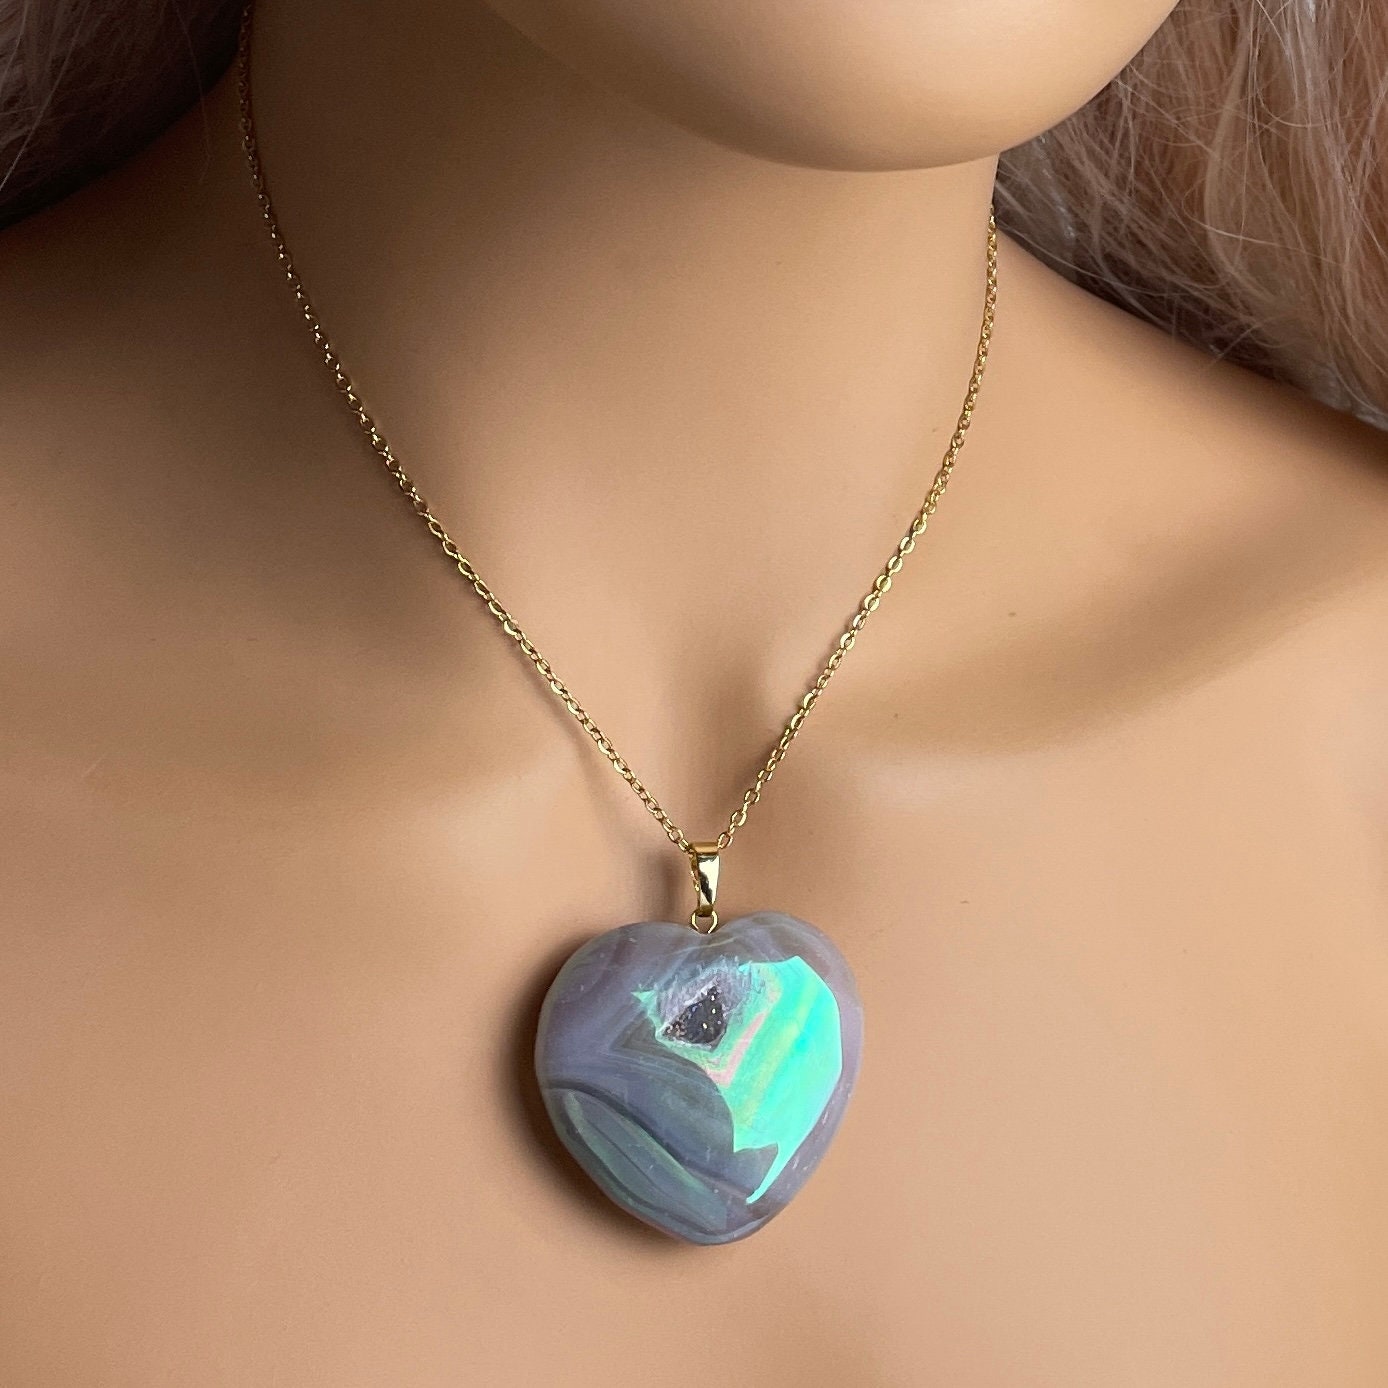 Aura Quartz Geode Necklace Gold, Unique Iridescent Heart Crystal Jewelry Boho, Gift For Her, M7-65